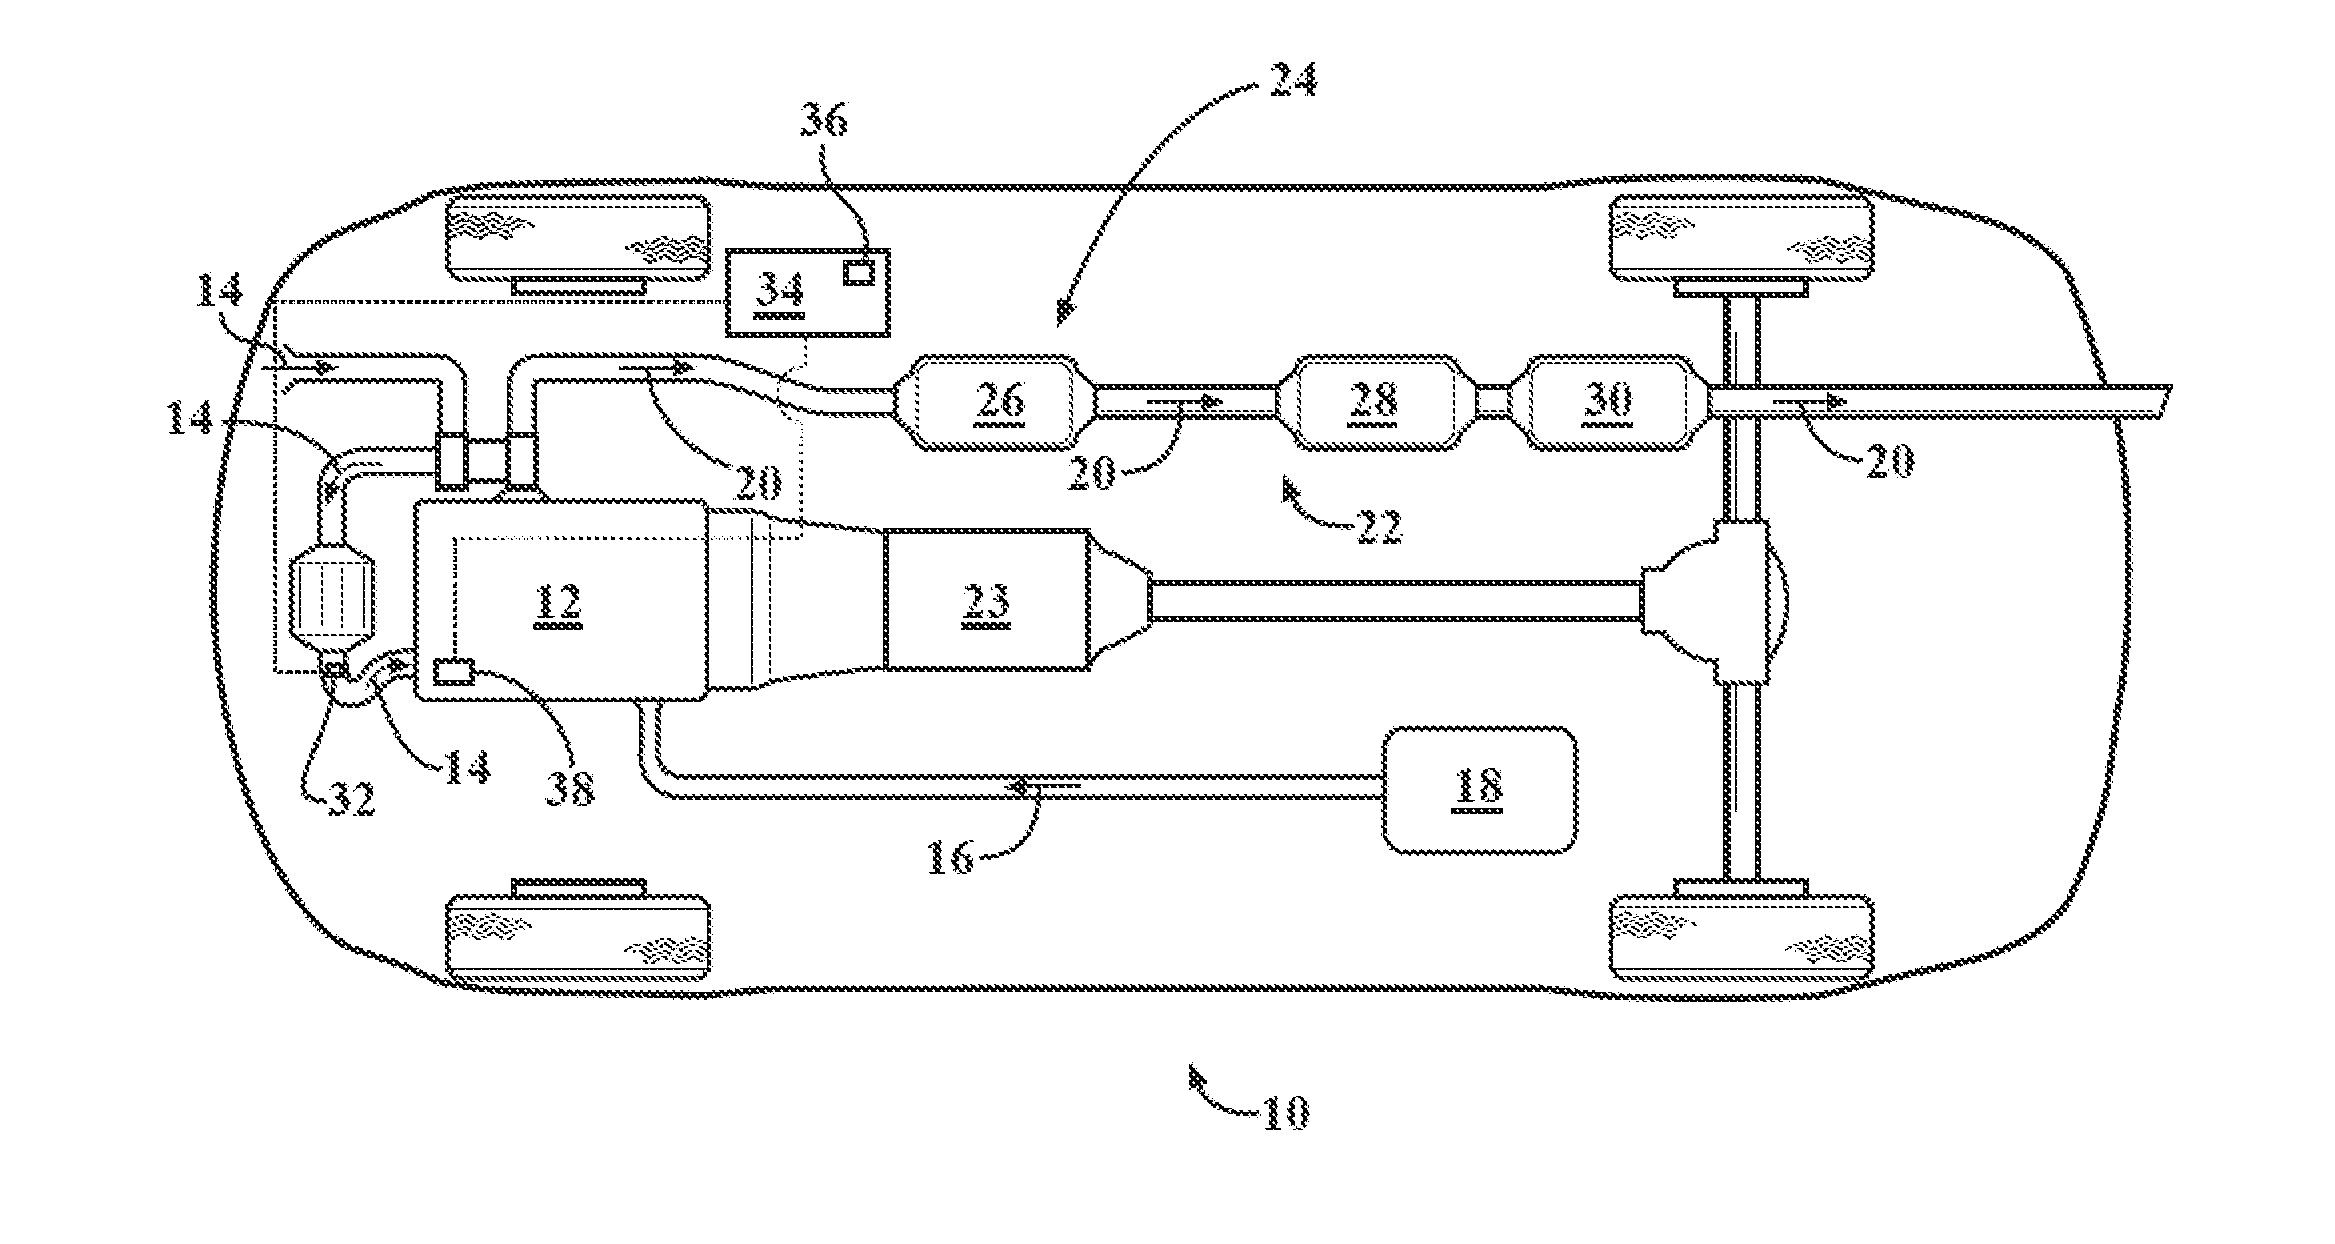 System and method for unloading hydrocarbon emissions from an exhaust after-treatment device